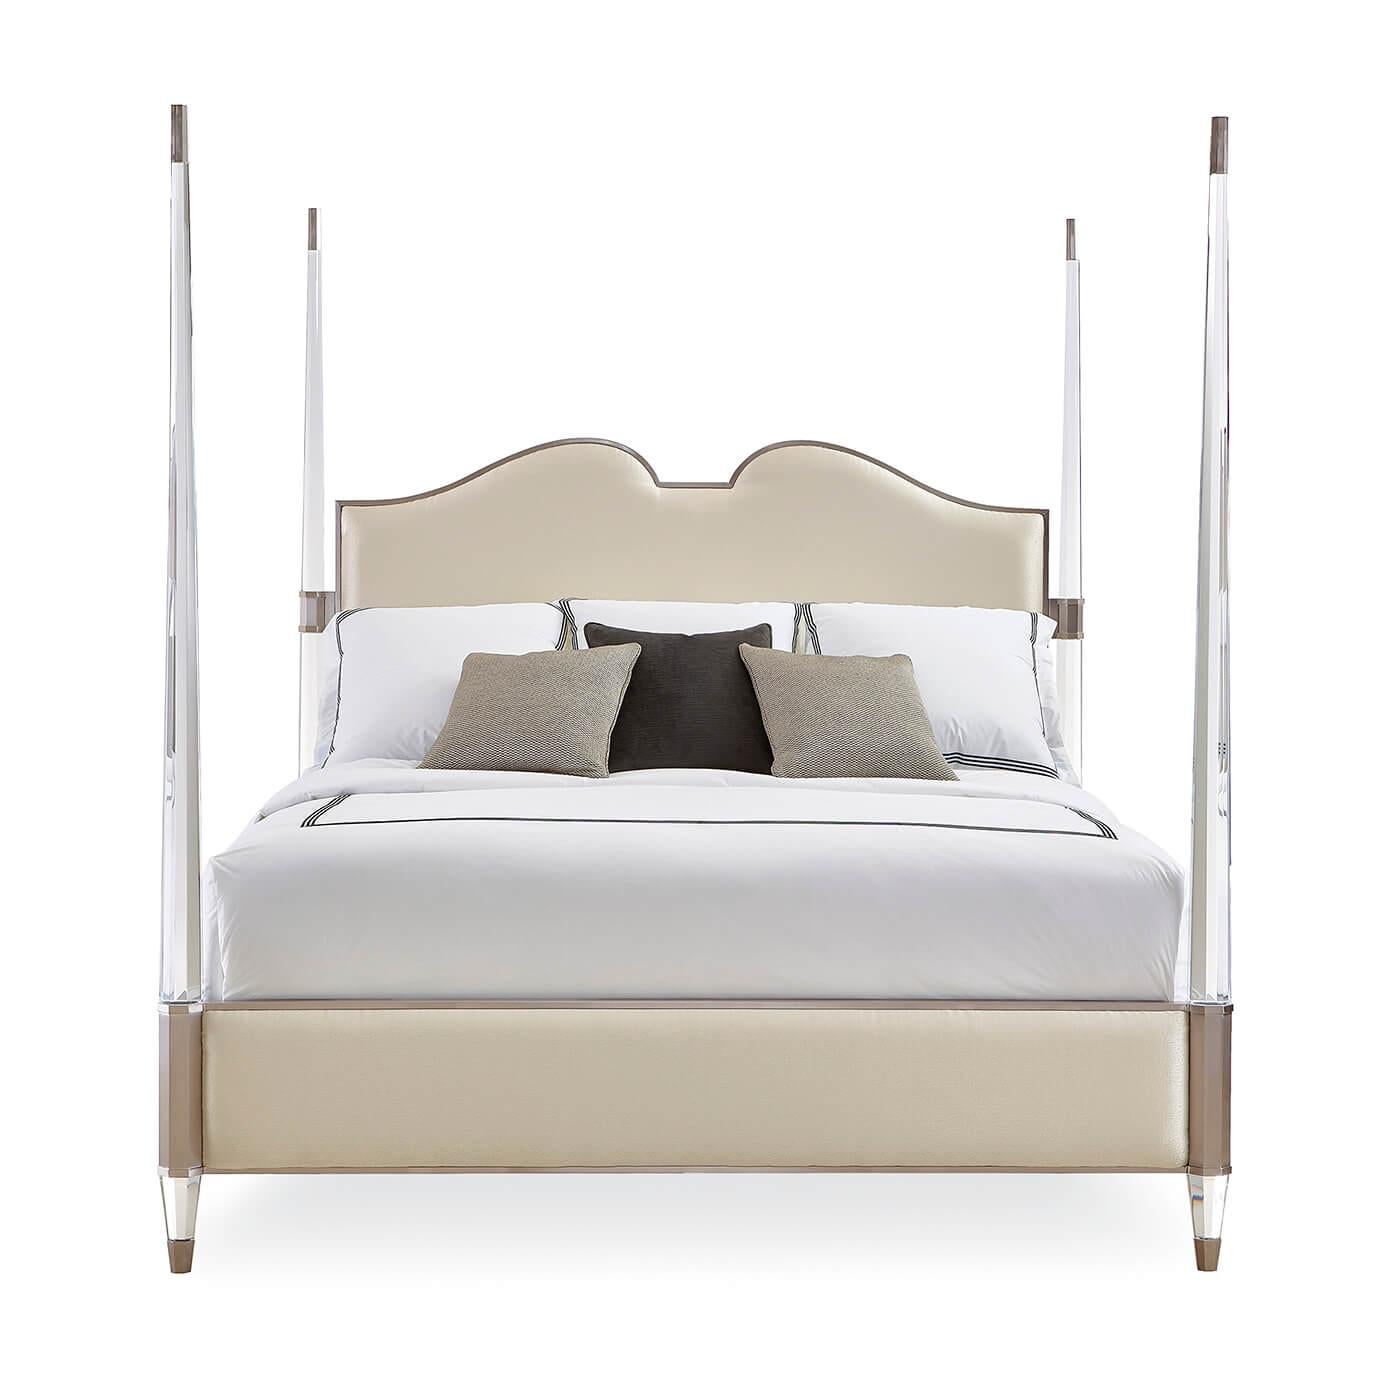 A modern four post king bed with four lucite posts. This bed has a luxurious upholstered headboard, footboard, and rails. Metal ferrules and a lightly brushed chrome finish add a finishing touch.
Dimensions
81.5